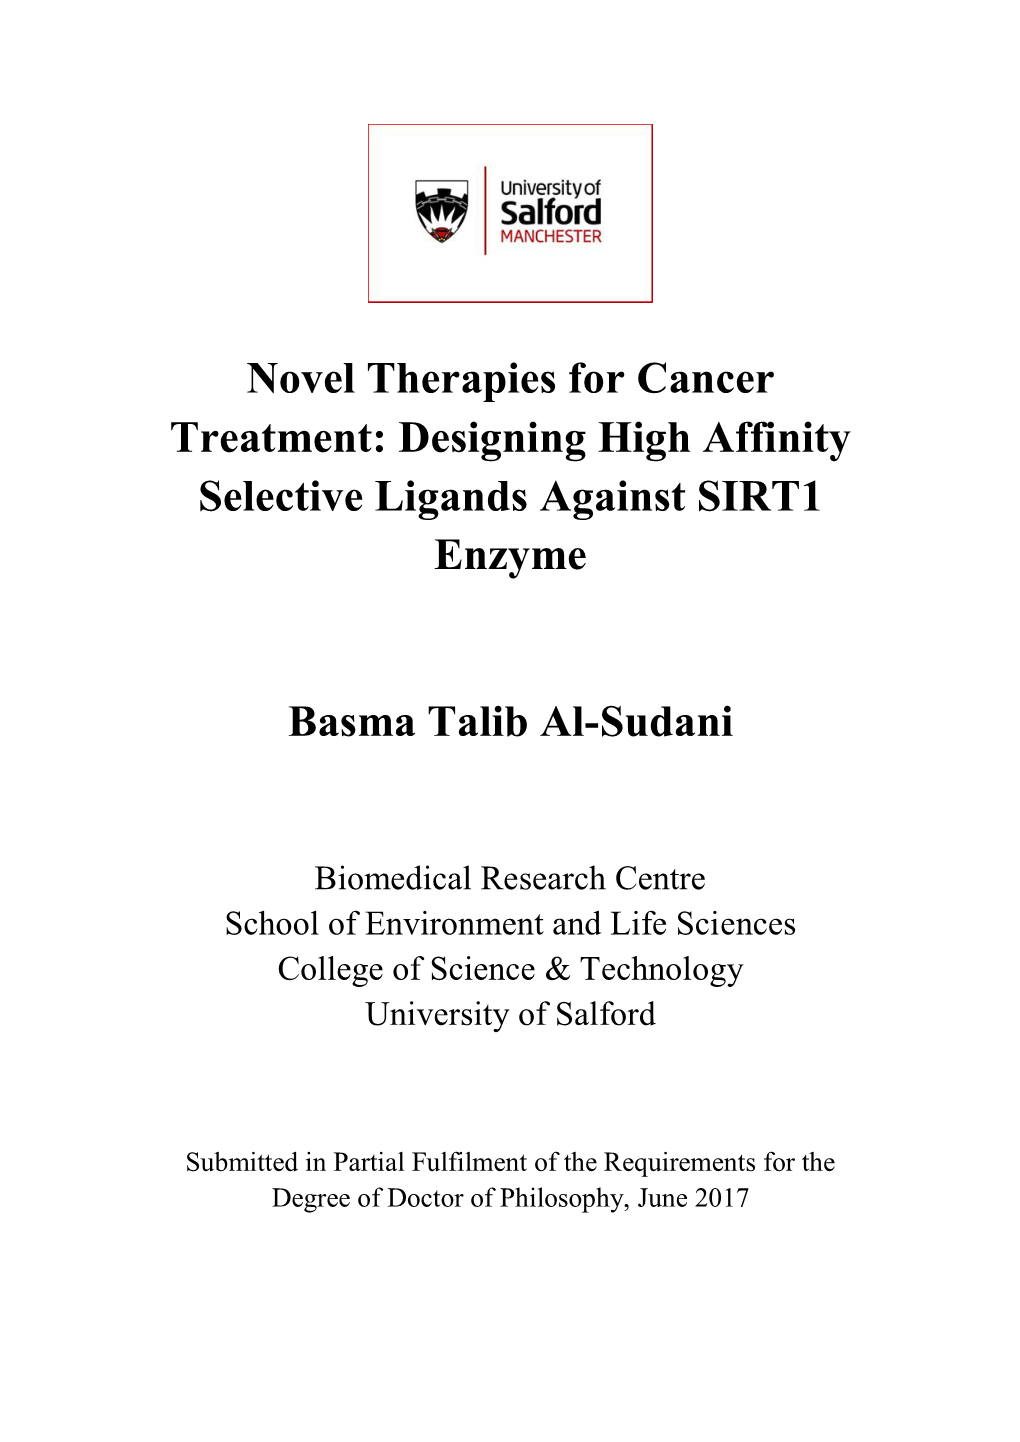 Novel Therapies for Cancer Treatment: Designing High Affinity Selective Ligands Against SIRT1 Enzyme Basma Talib Al-Sudani